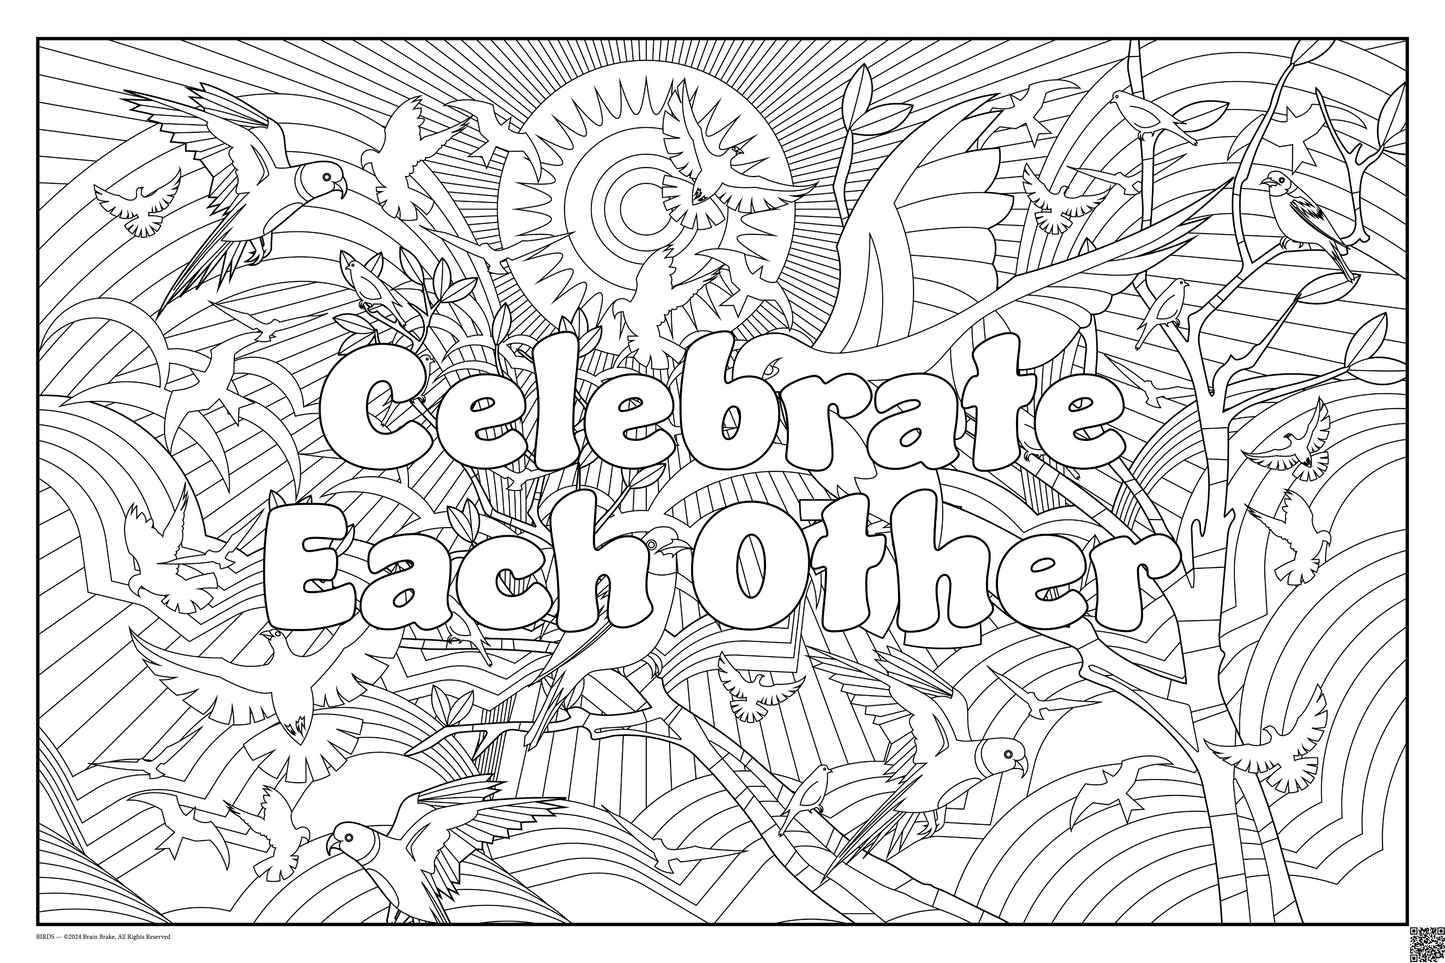 Build Community: Celebrate Each Other